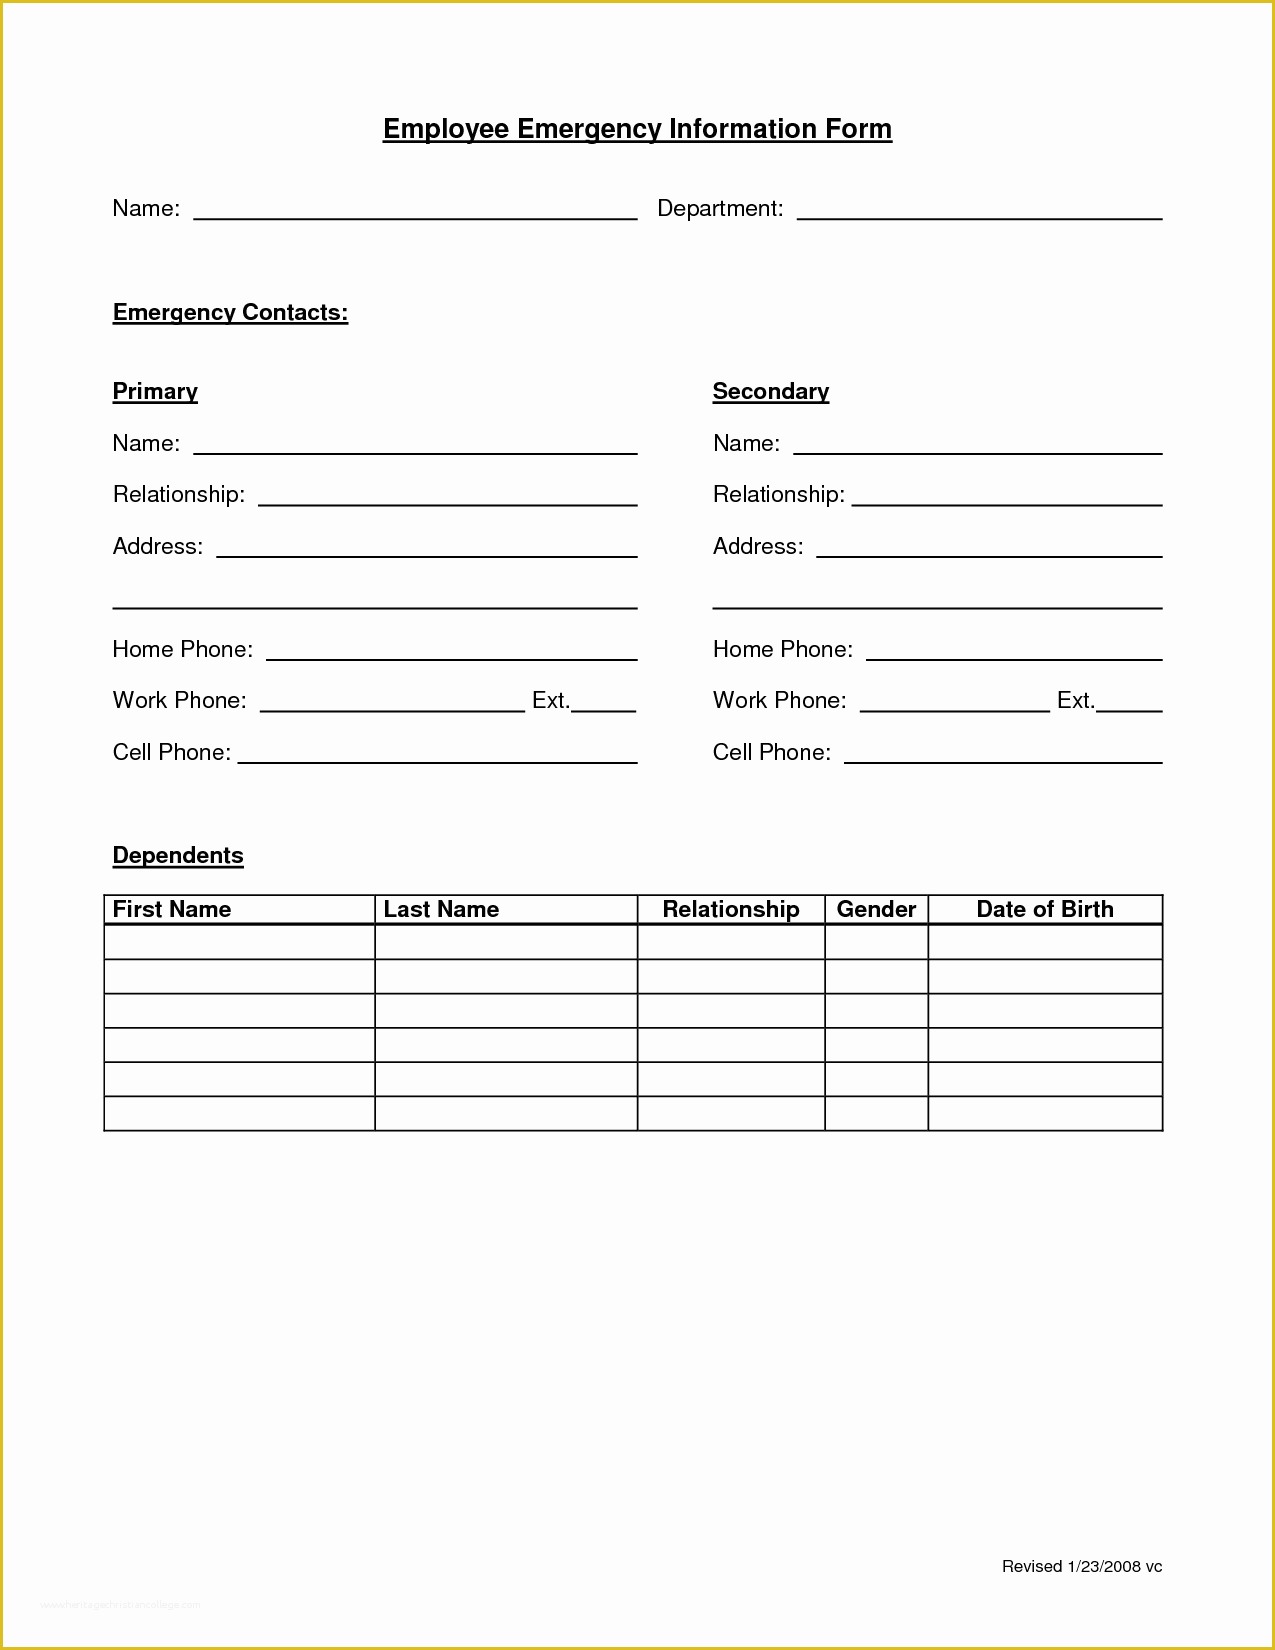 Free Emergency Contact form Template for Employees Of Employee Emergency form Employee forms